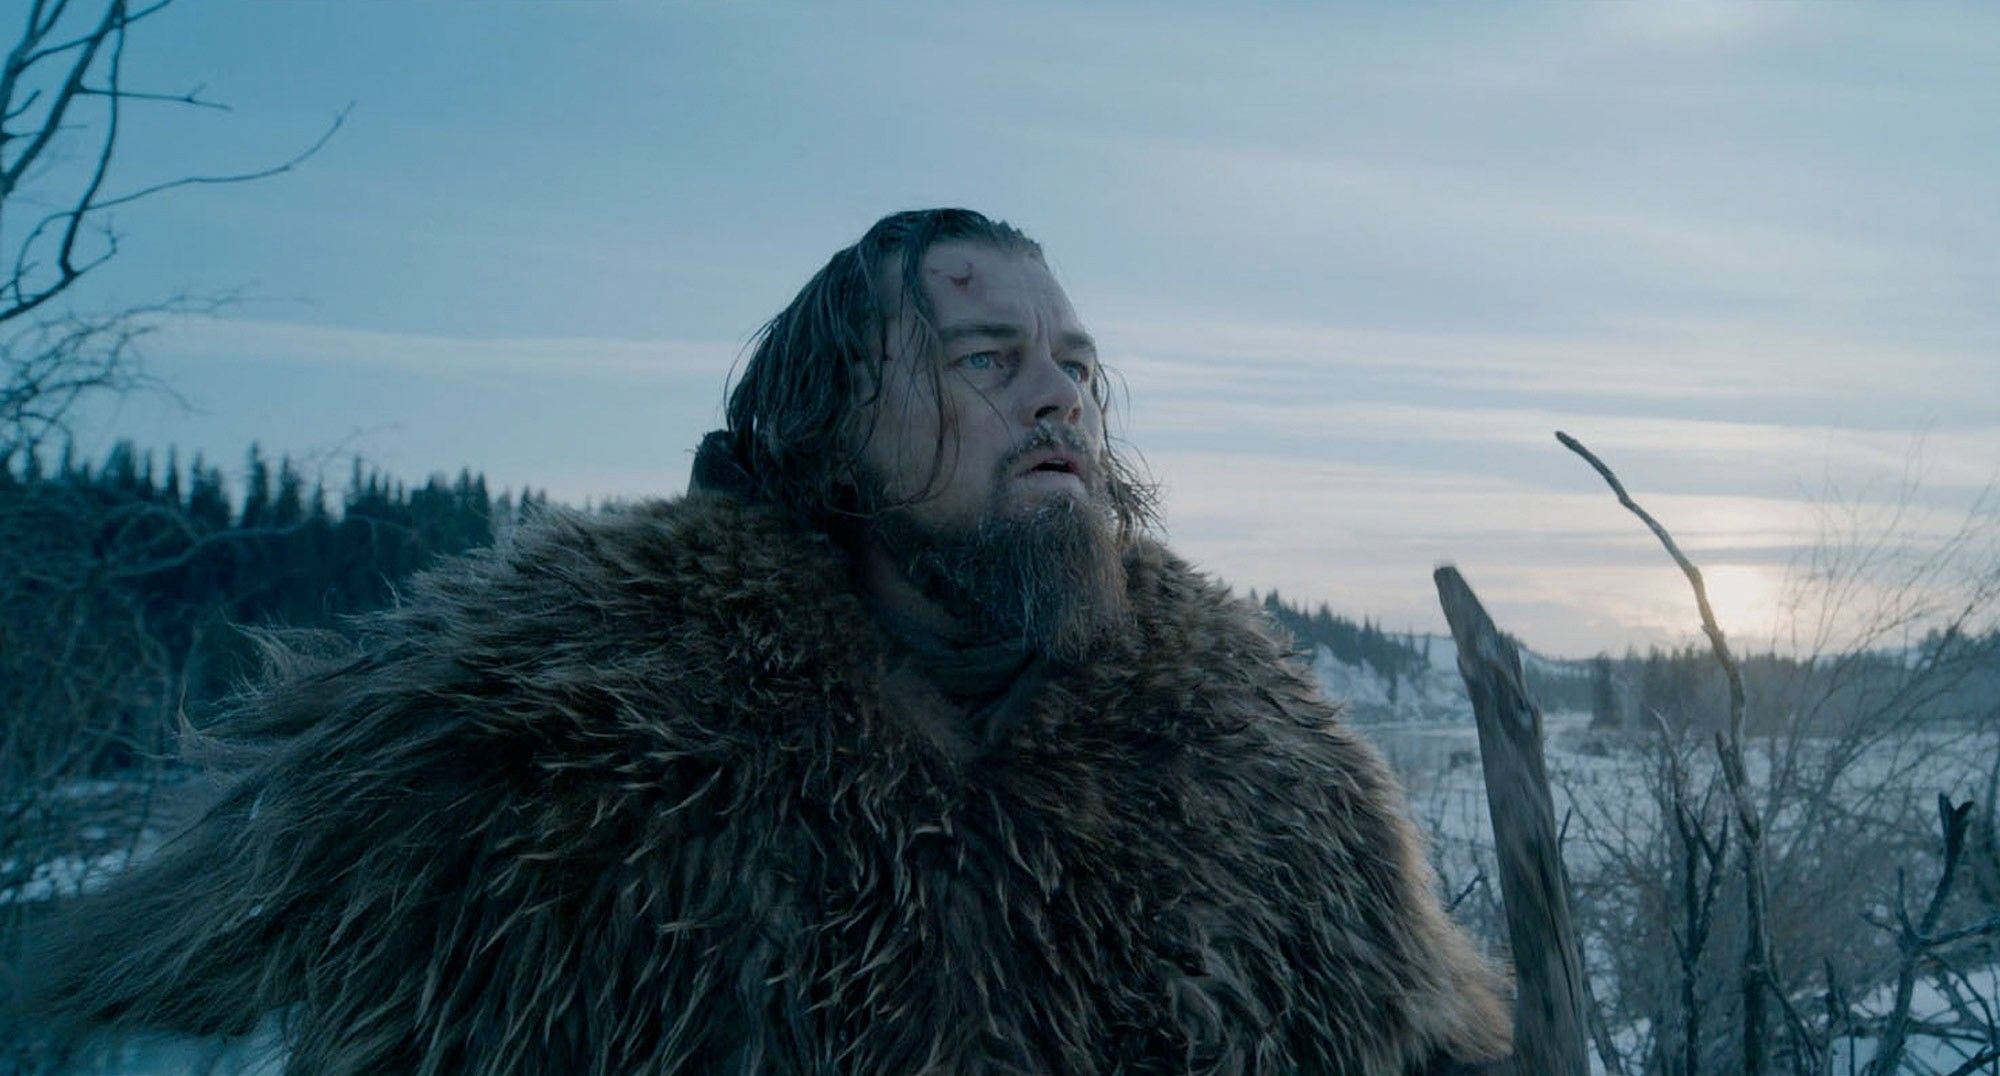 watch the revenant 1080p hd online free